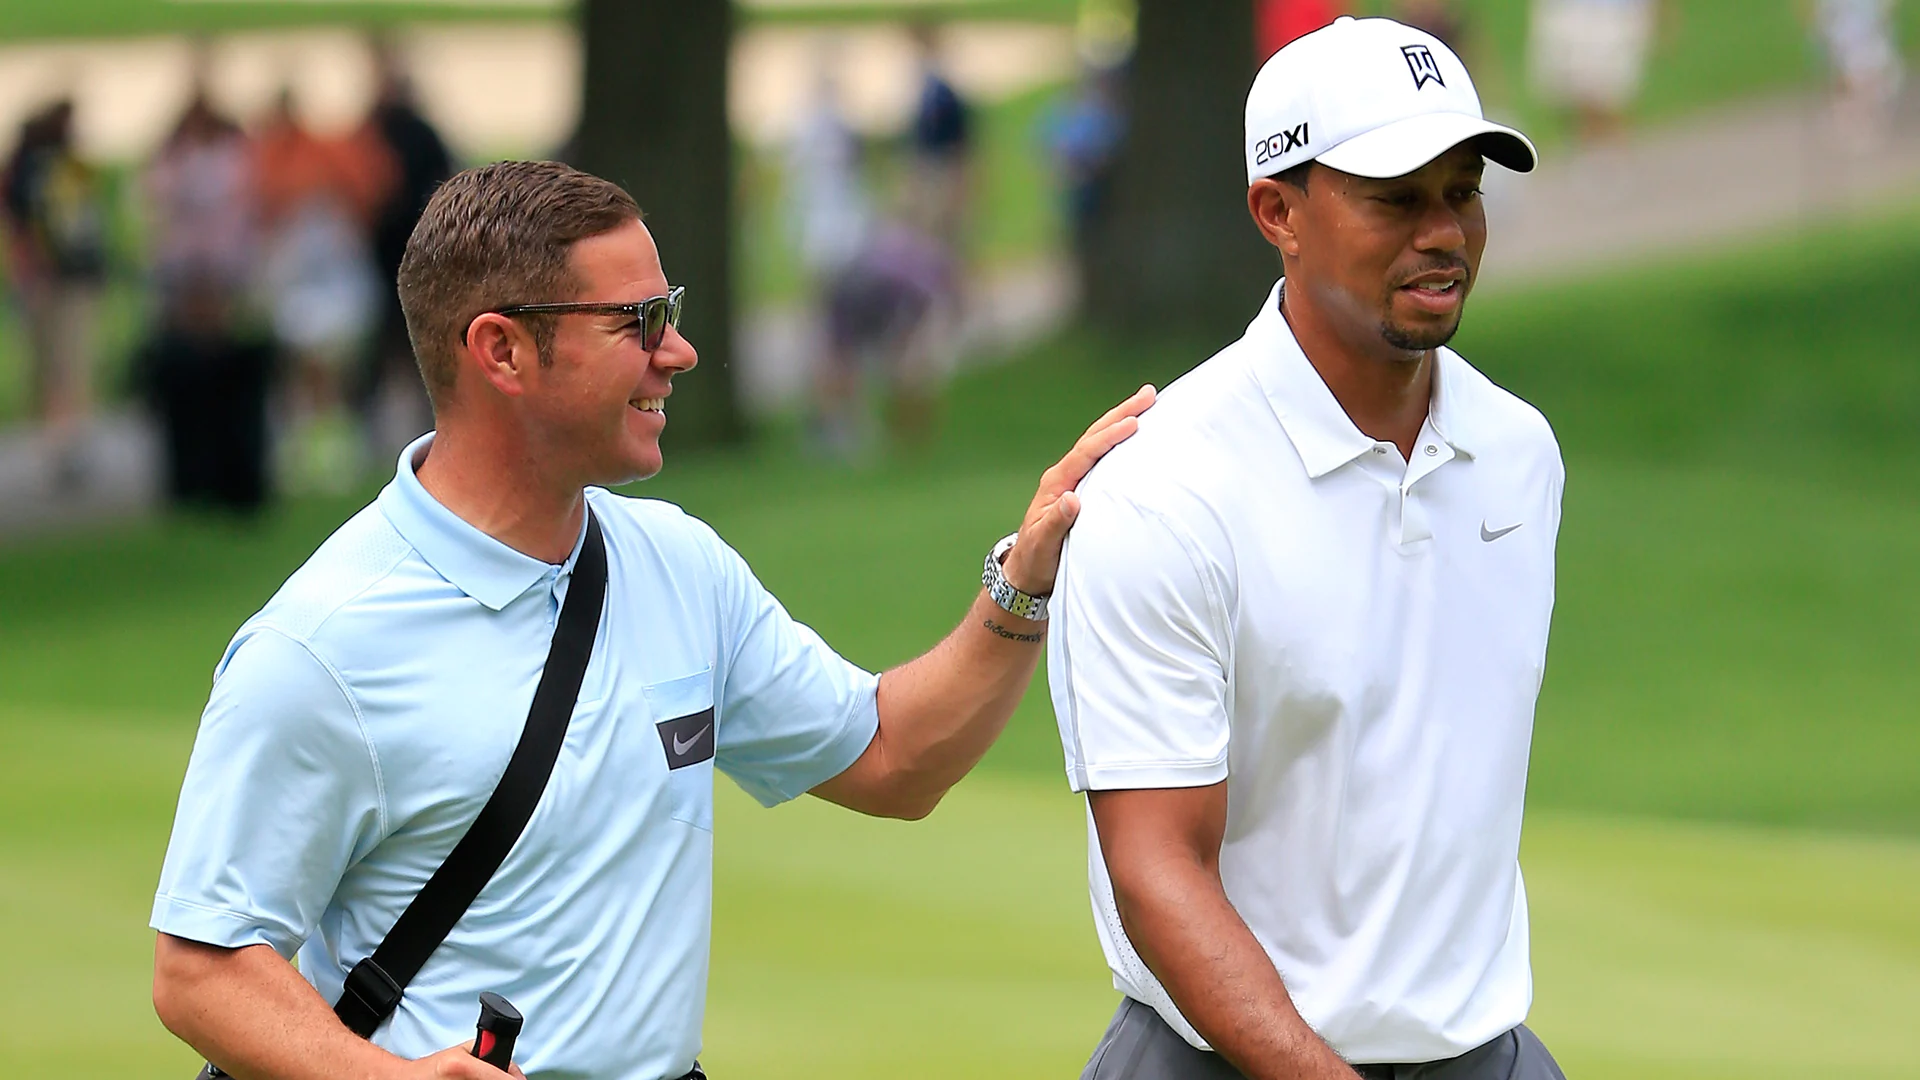 Sean Foley reflects: ‘I think I over-coached’ Tiger Woods